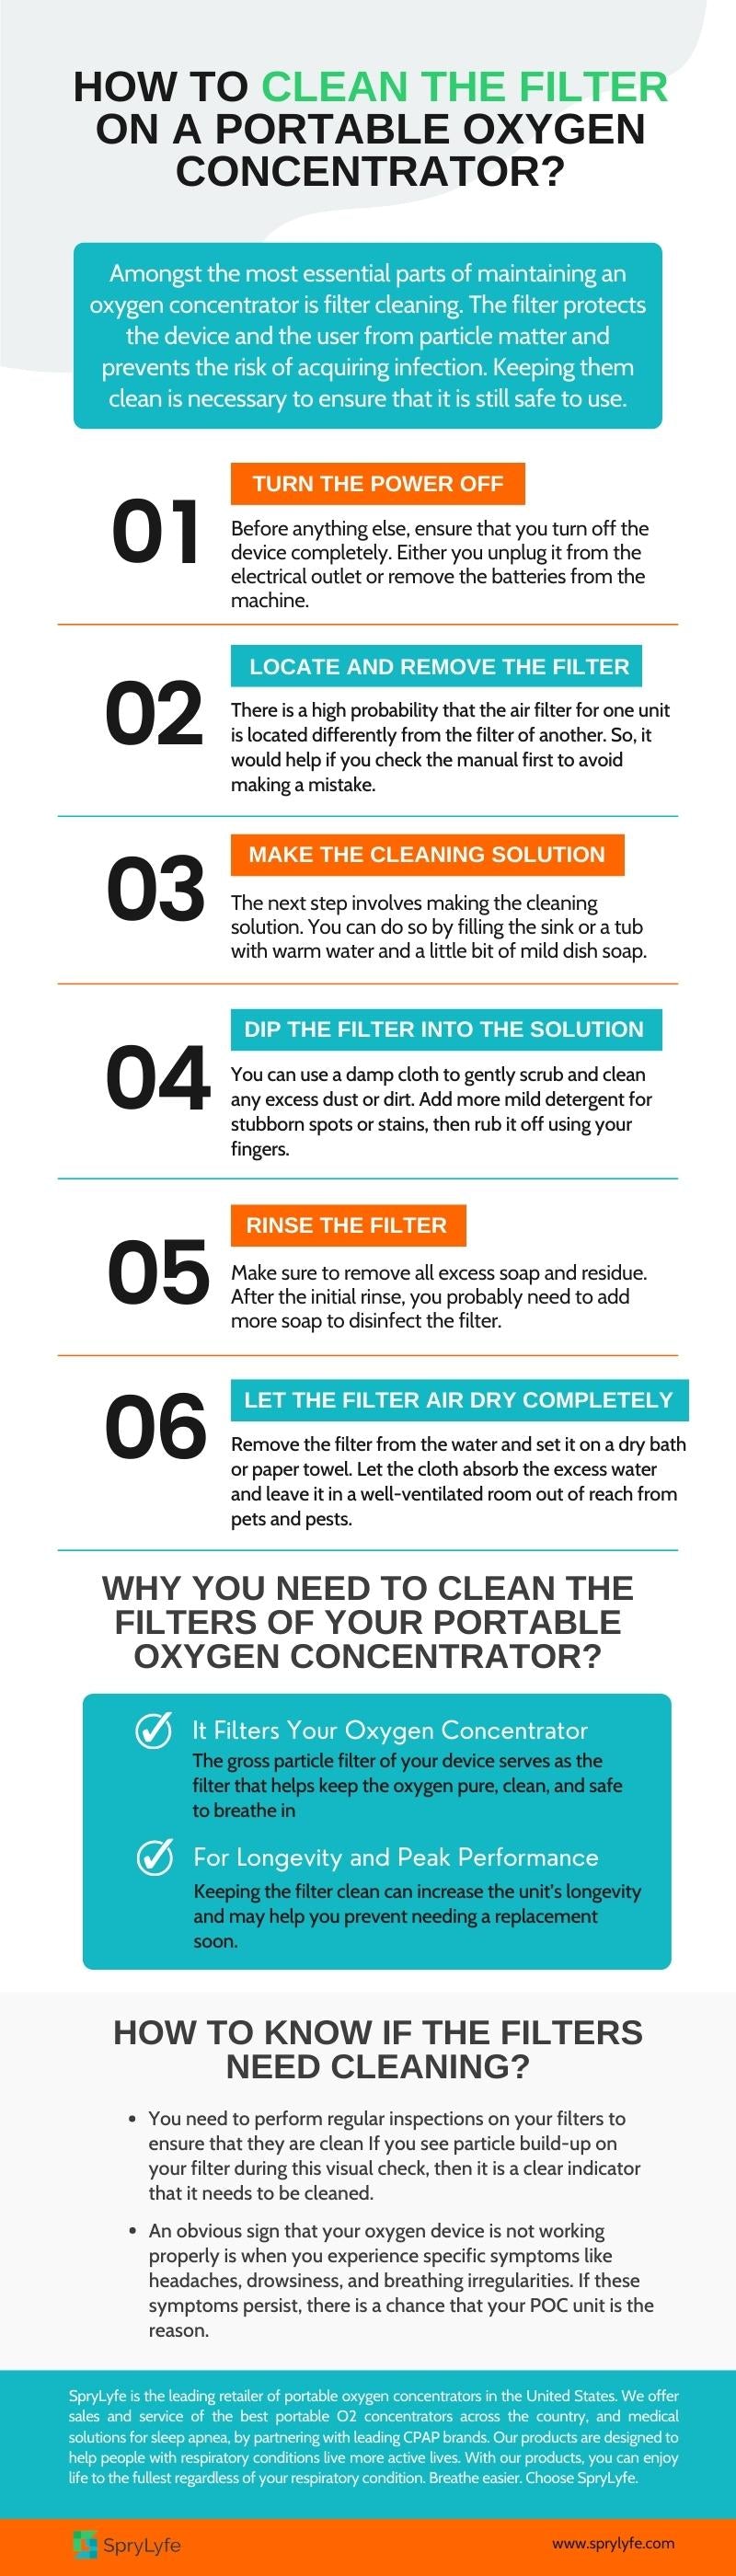 How to clean the filter on a portable oxygen concentrator infographic by Sprylyfe